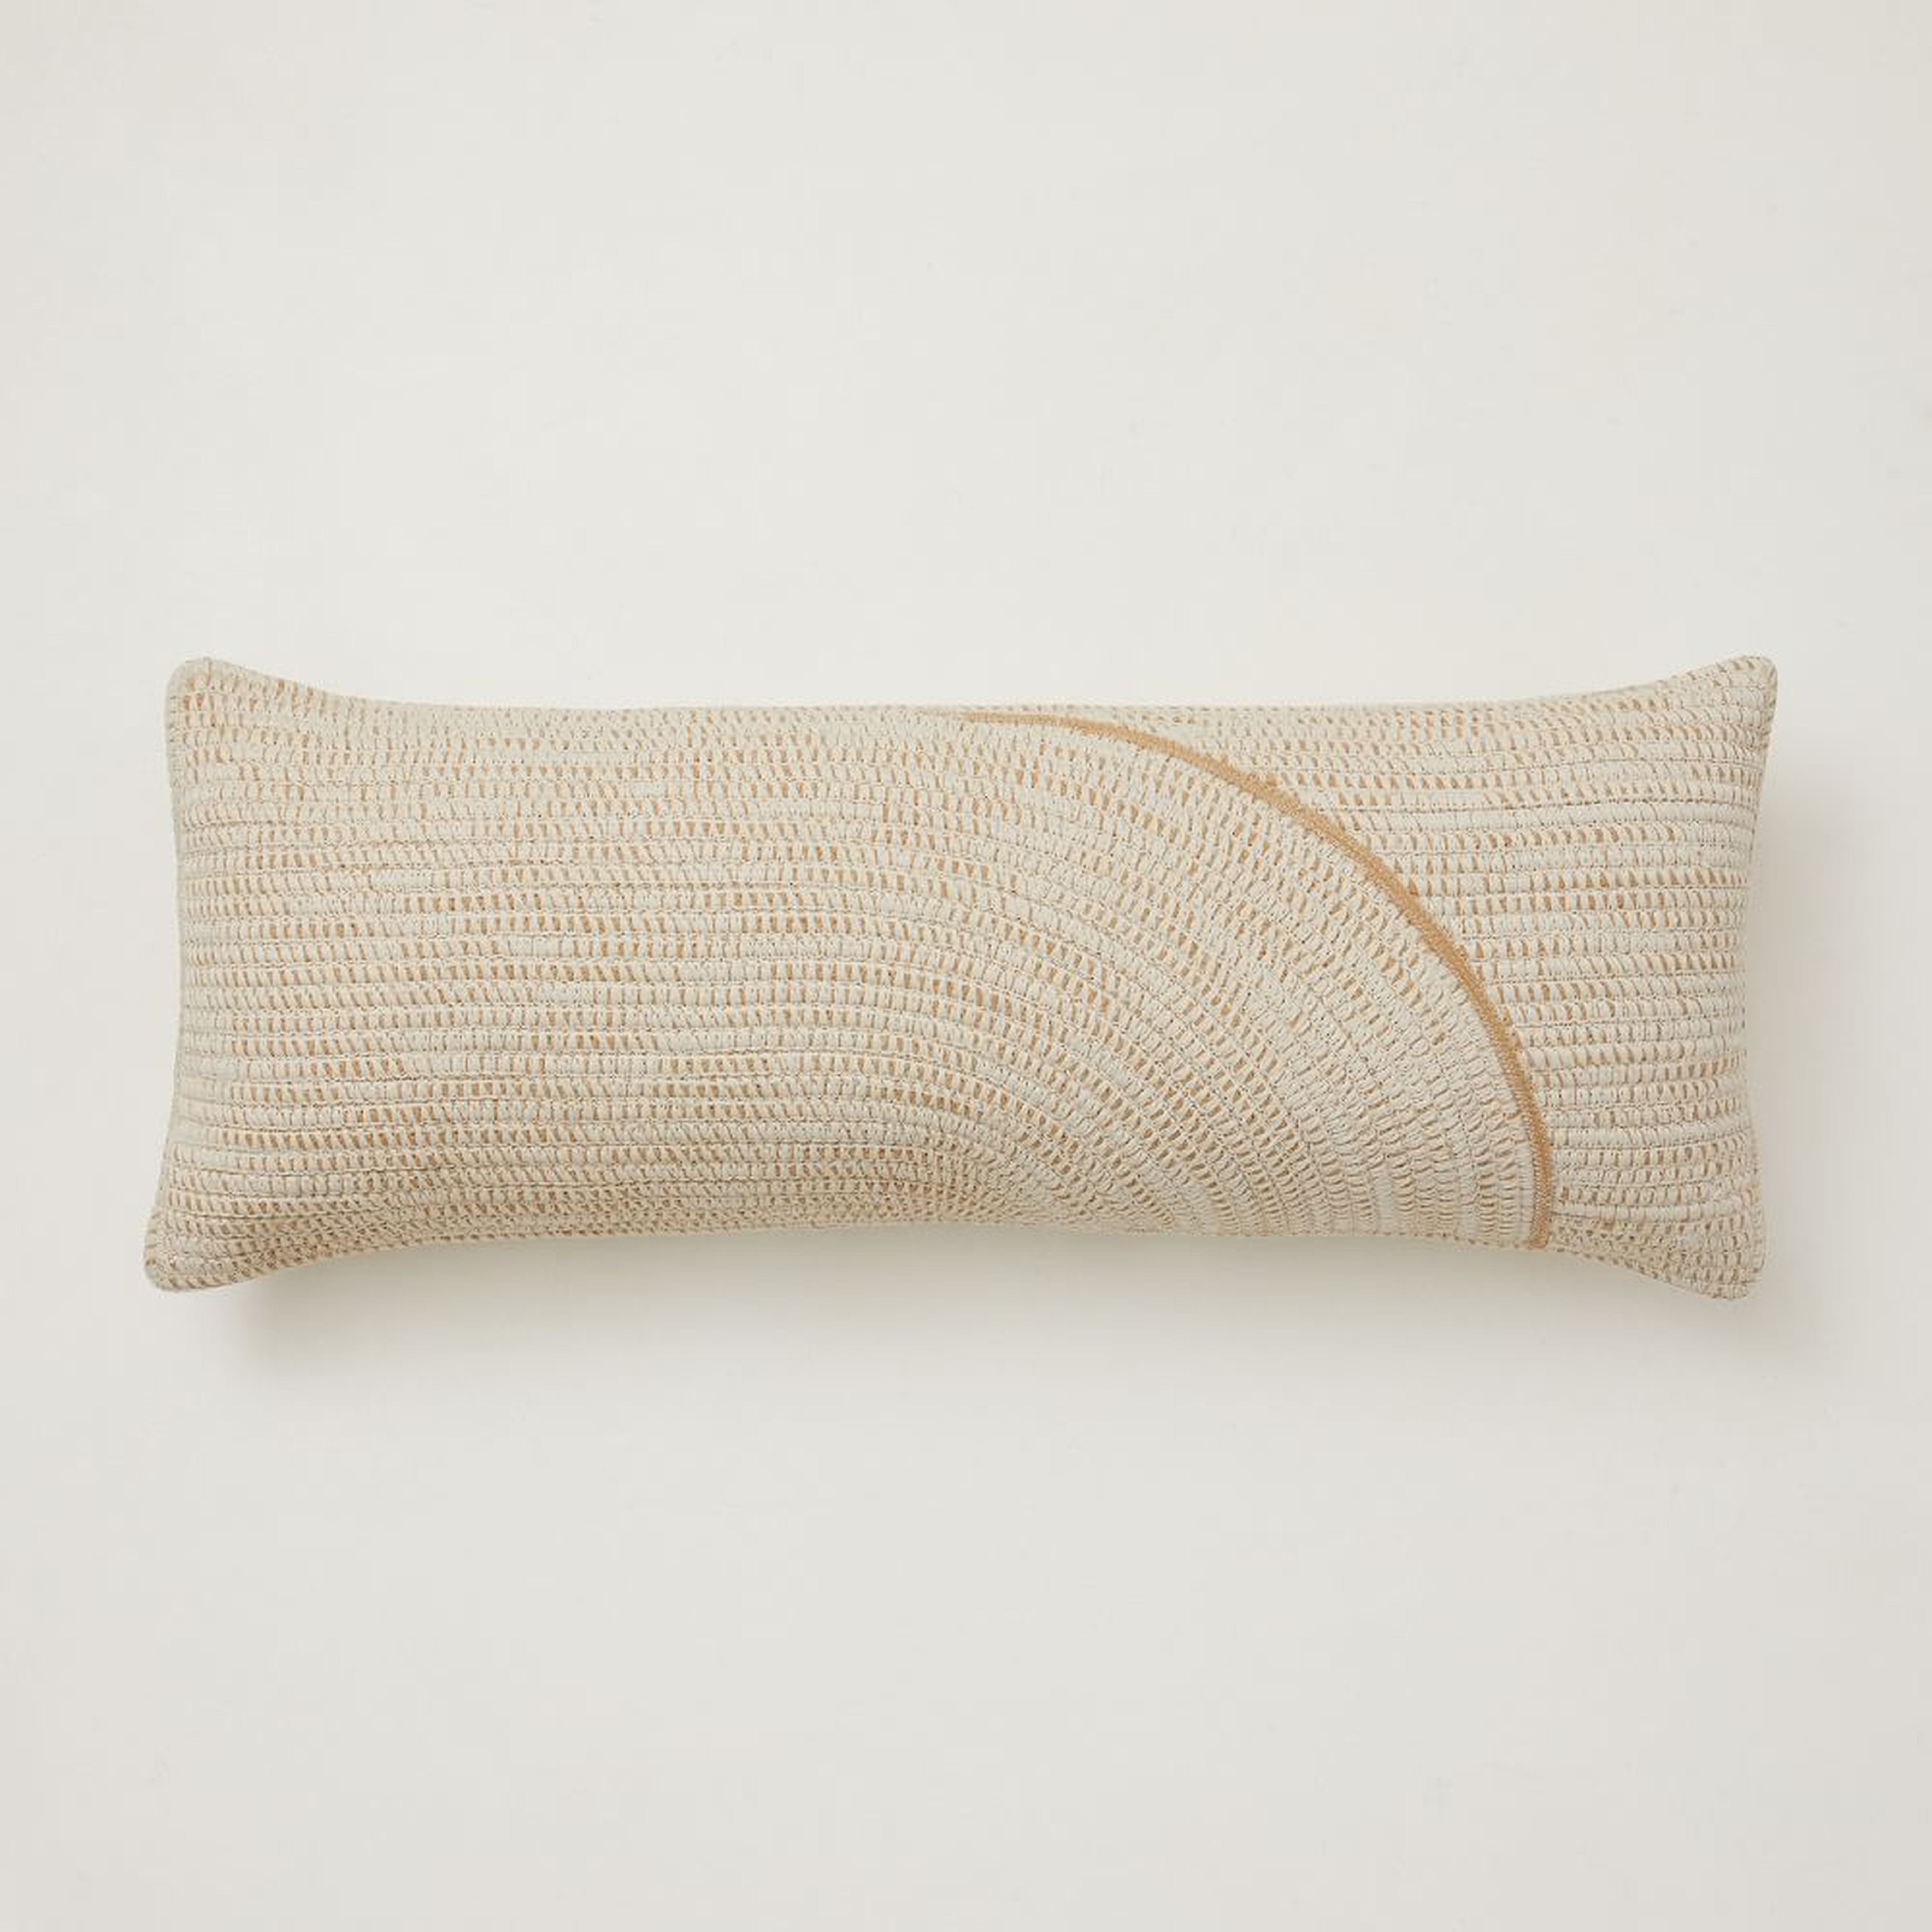 Outdoor Woven Arches Pillow, 14"x36", Natural - West Elm